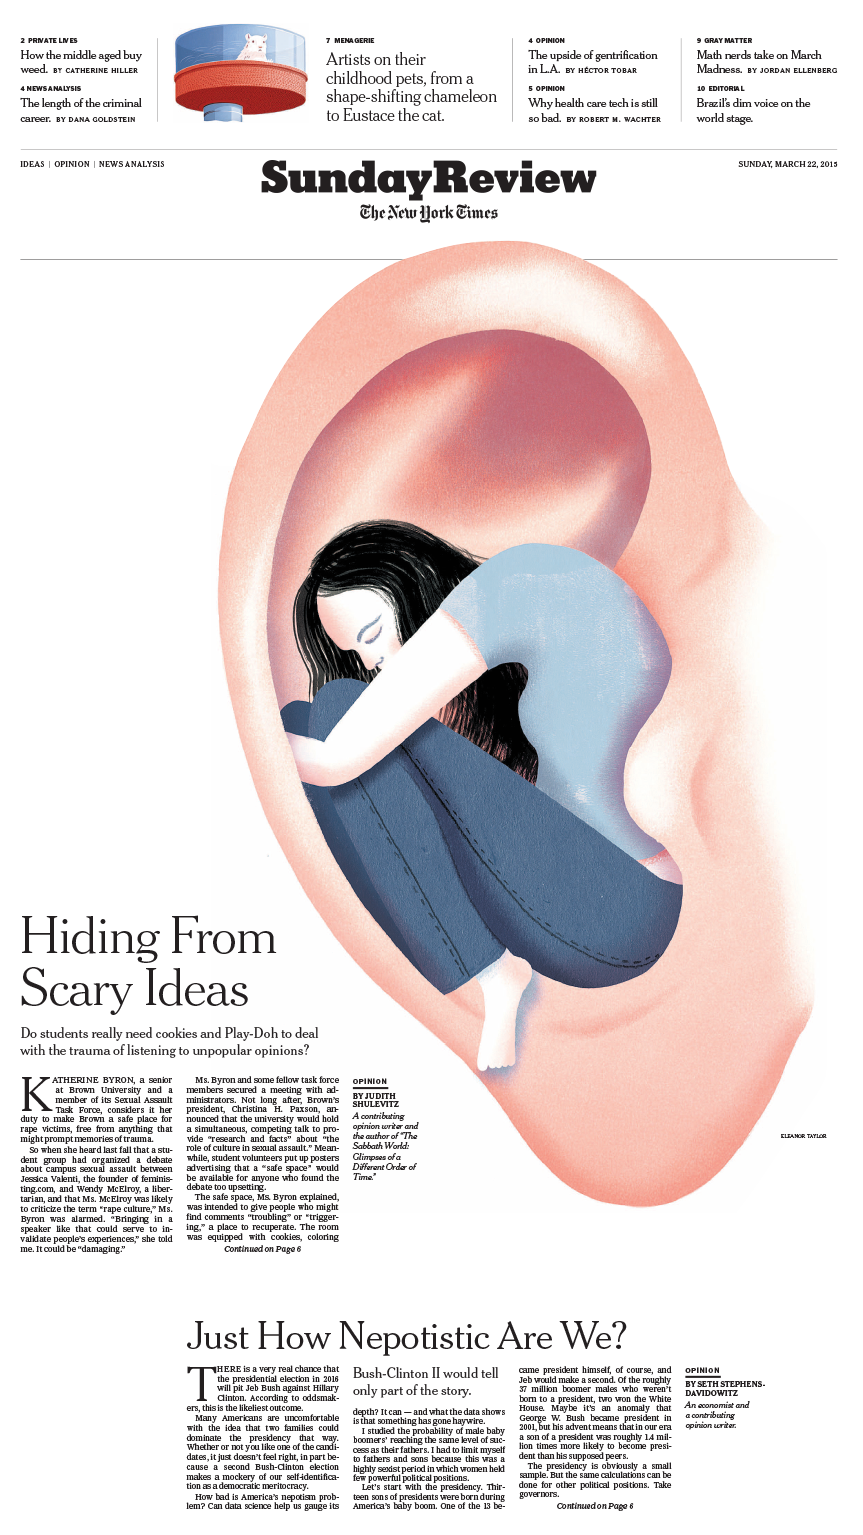 Sunday Review: Hiding From Scary Ideas